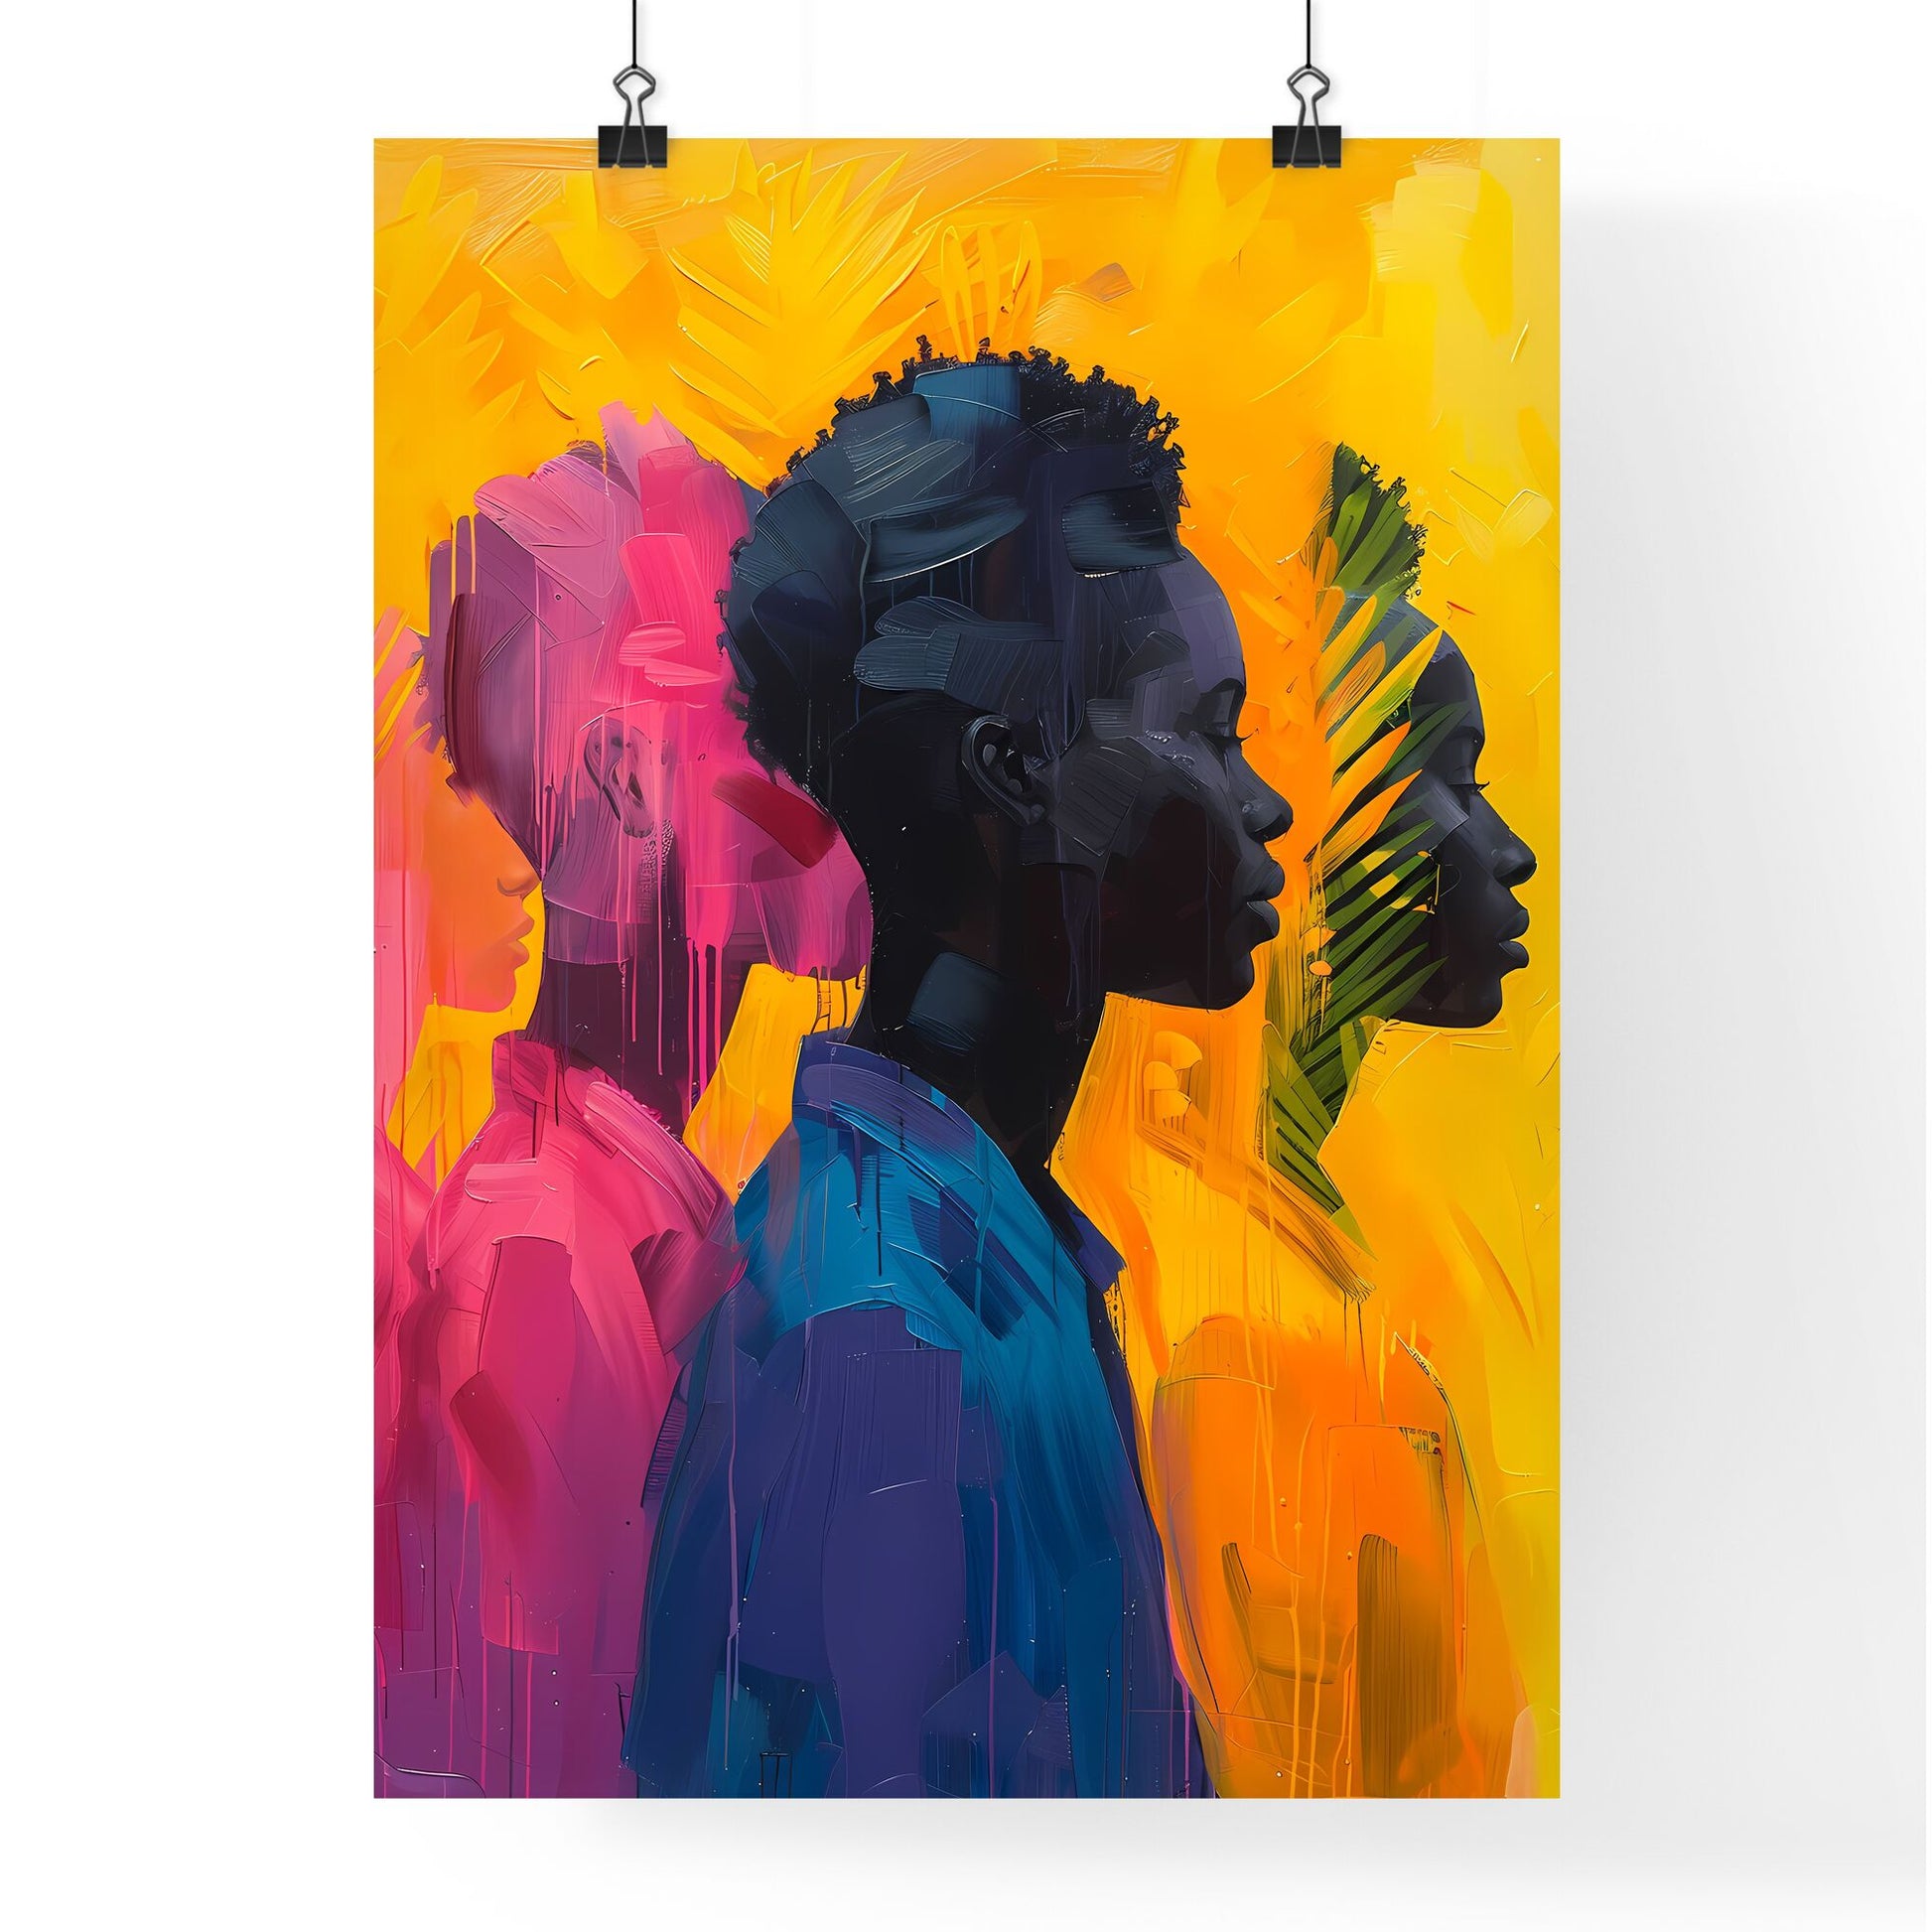 Modern African Abstract Art: Vibrant Urban Jungle Pastel Colors Multiracial People Default Title